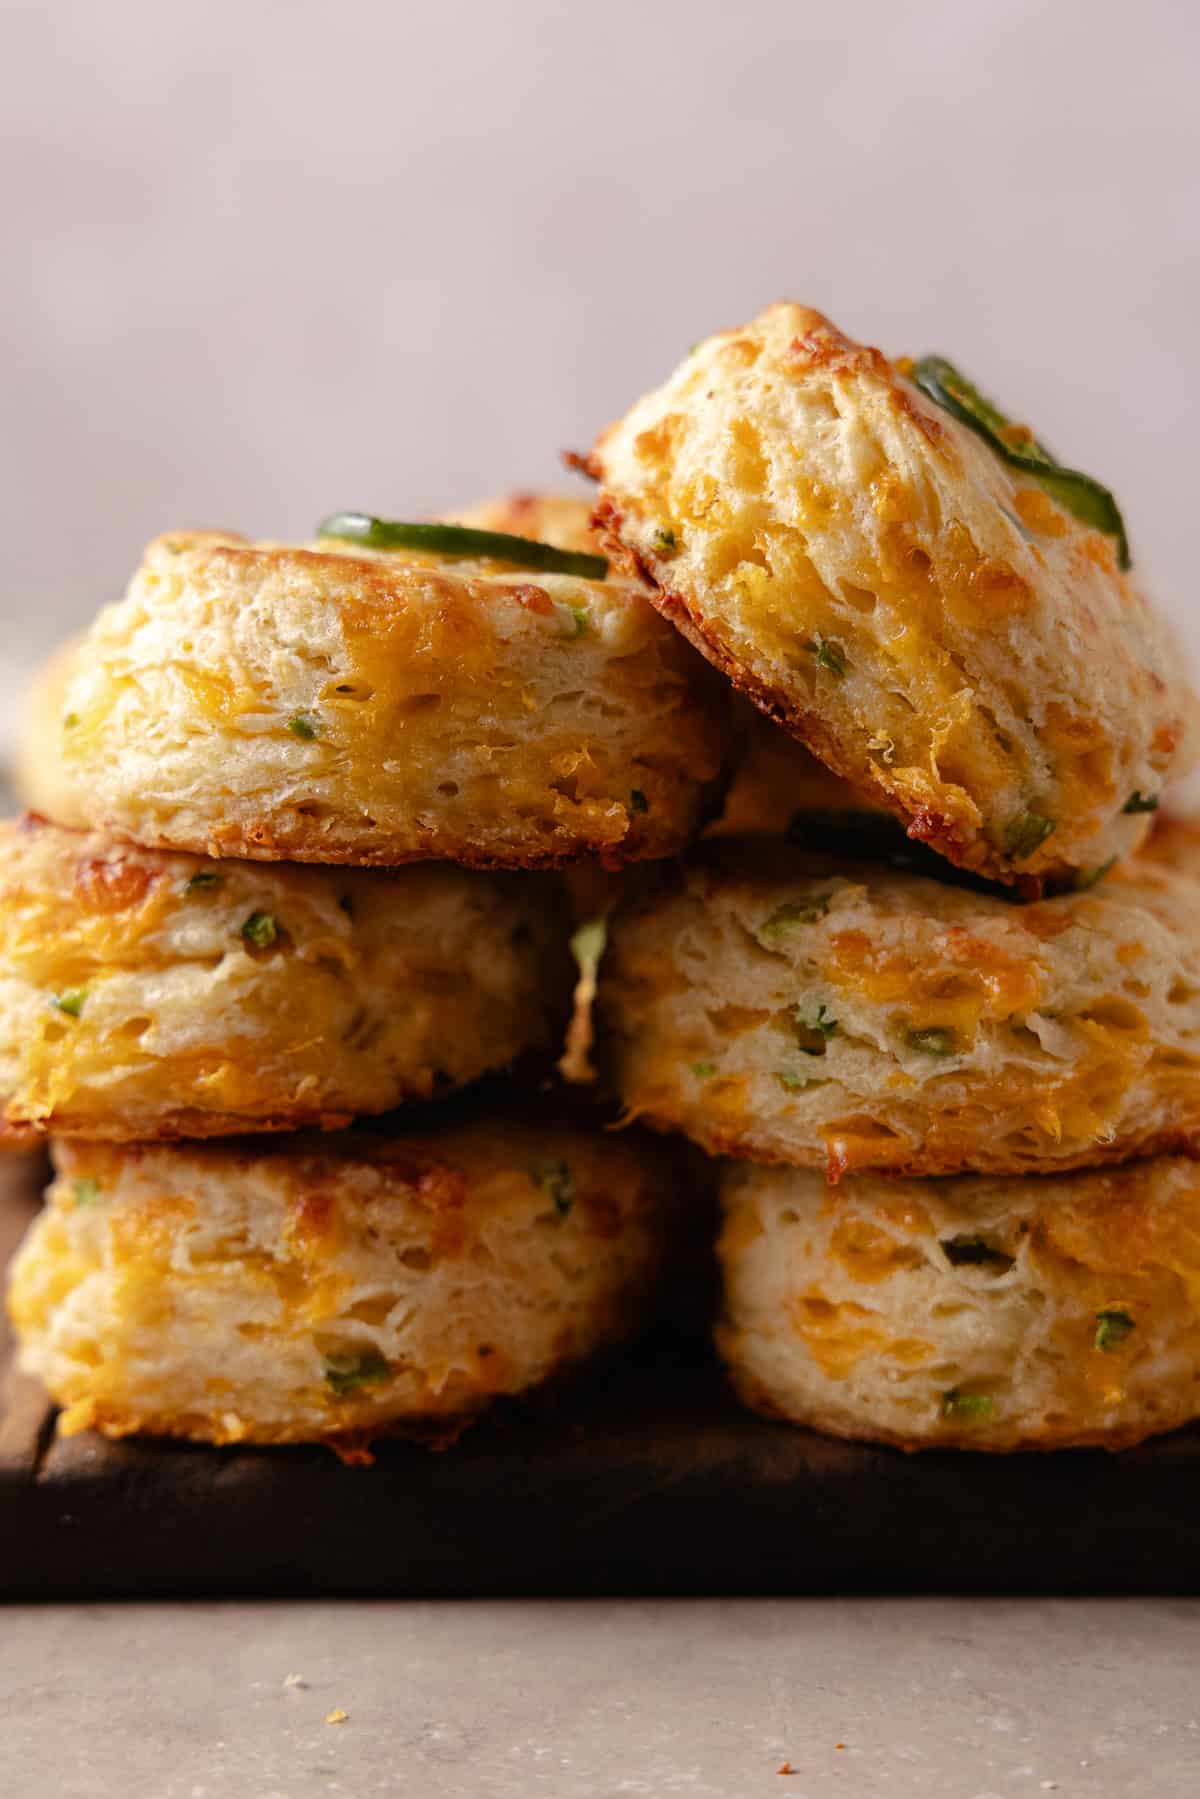 A pile of Jalapeno Cheddar Biscuits on a cutting board, showing off the flaky layers.